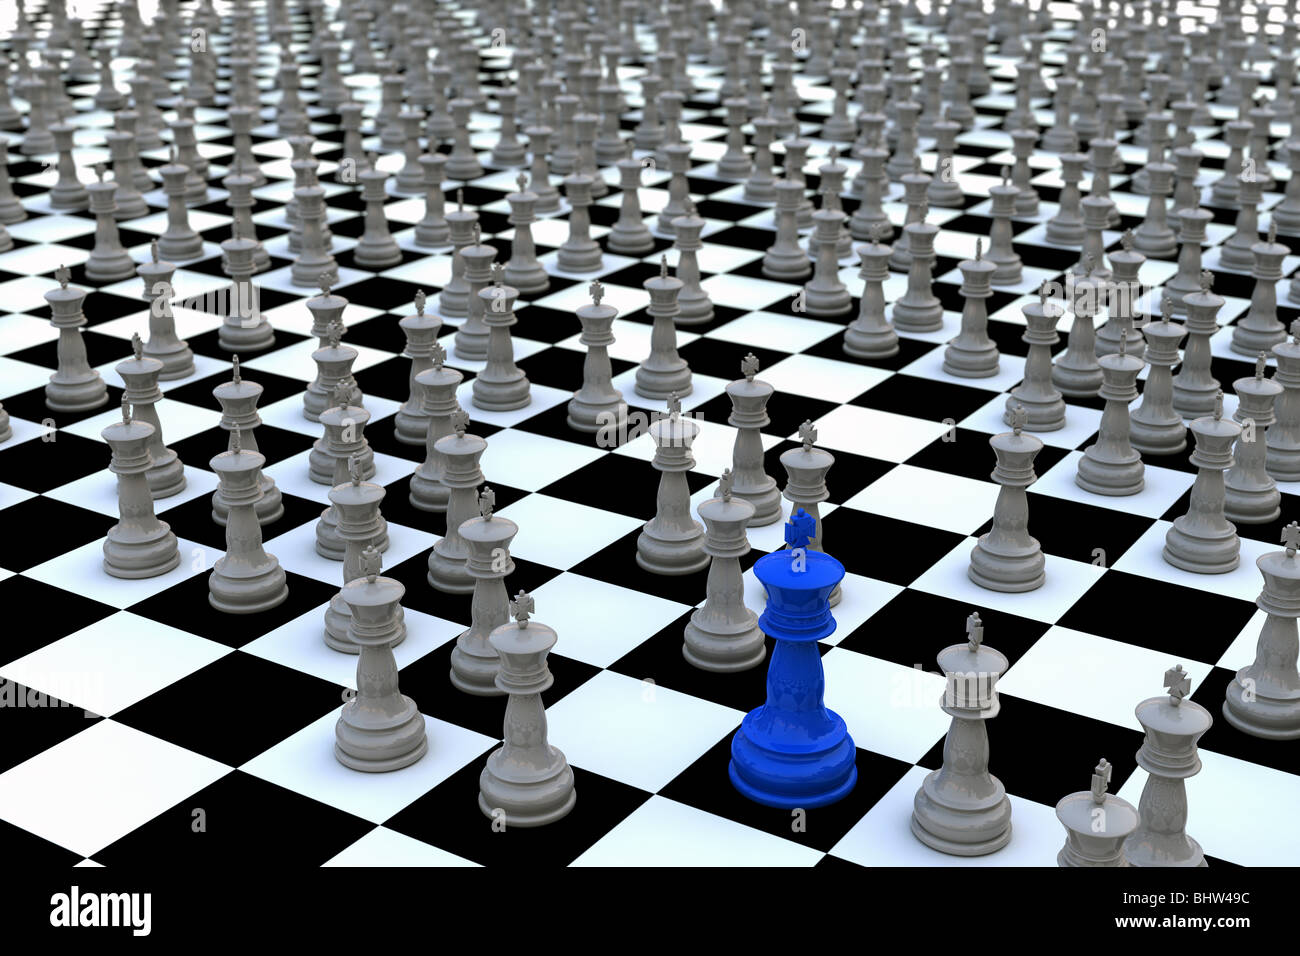 Concept for being exceptional. The King of kings. Blue chess king amongst hundreds of gray kings on a checkered surface. Stock Photo